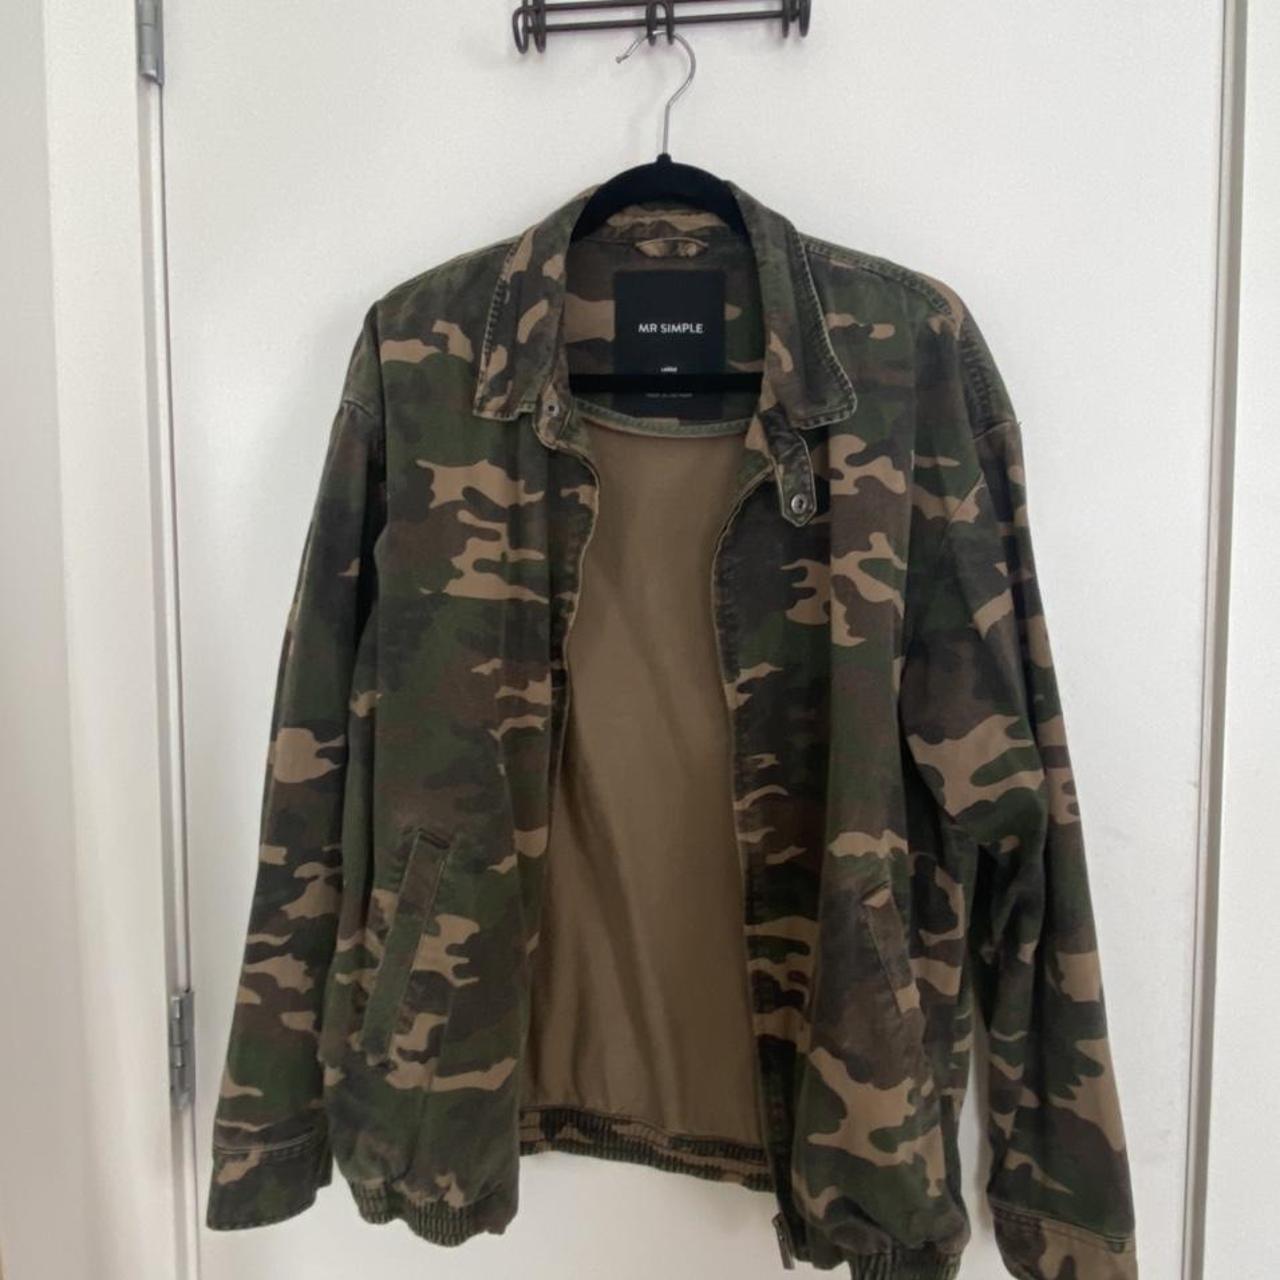 Product Image 1 - Camo jacket from Mr Simple,